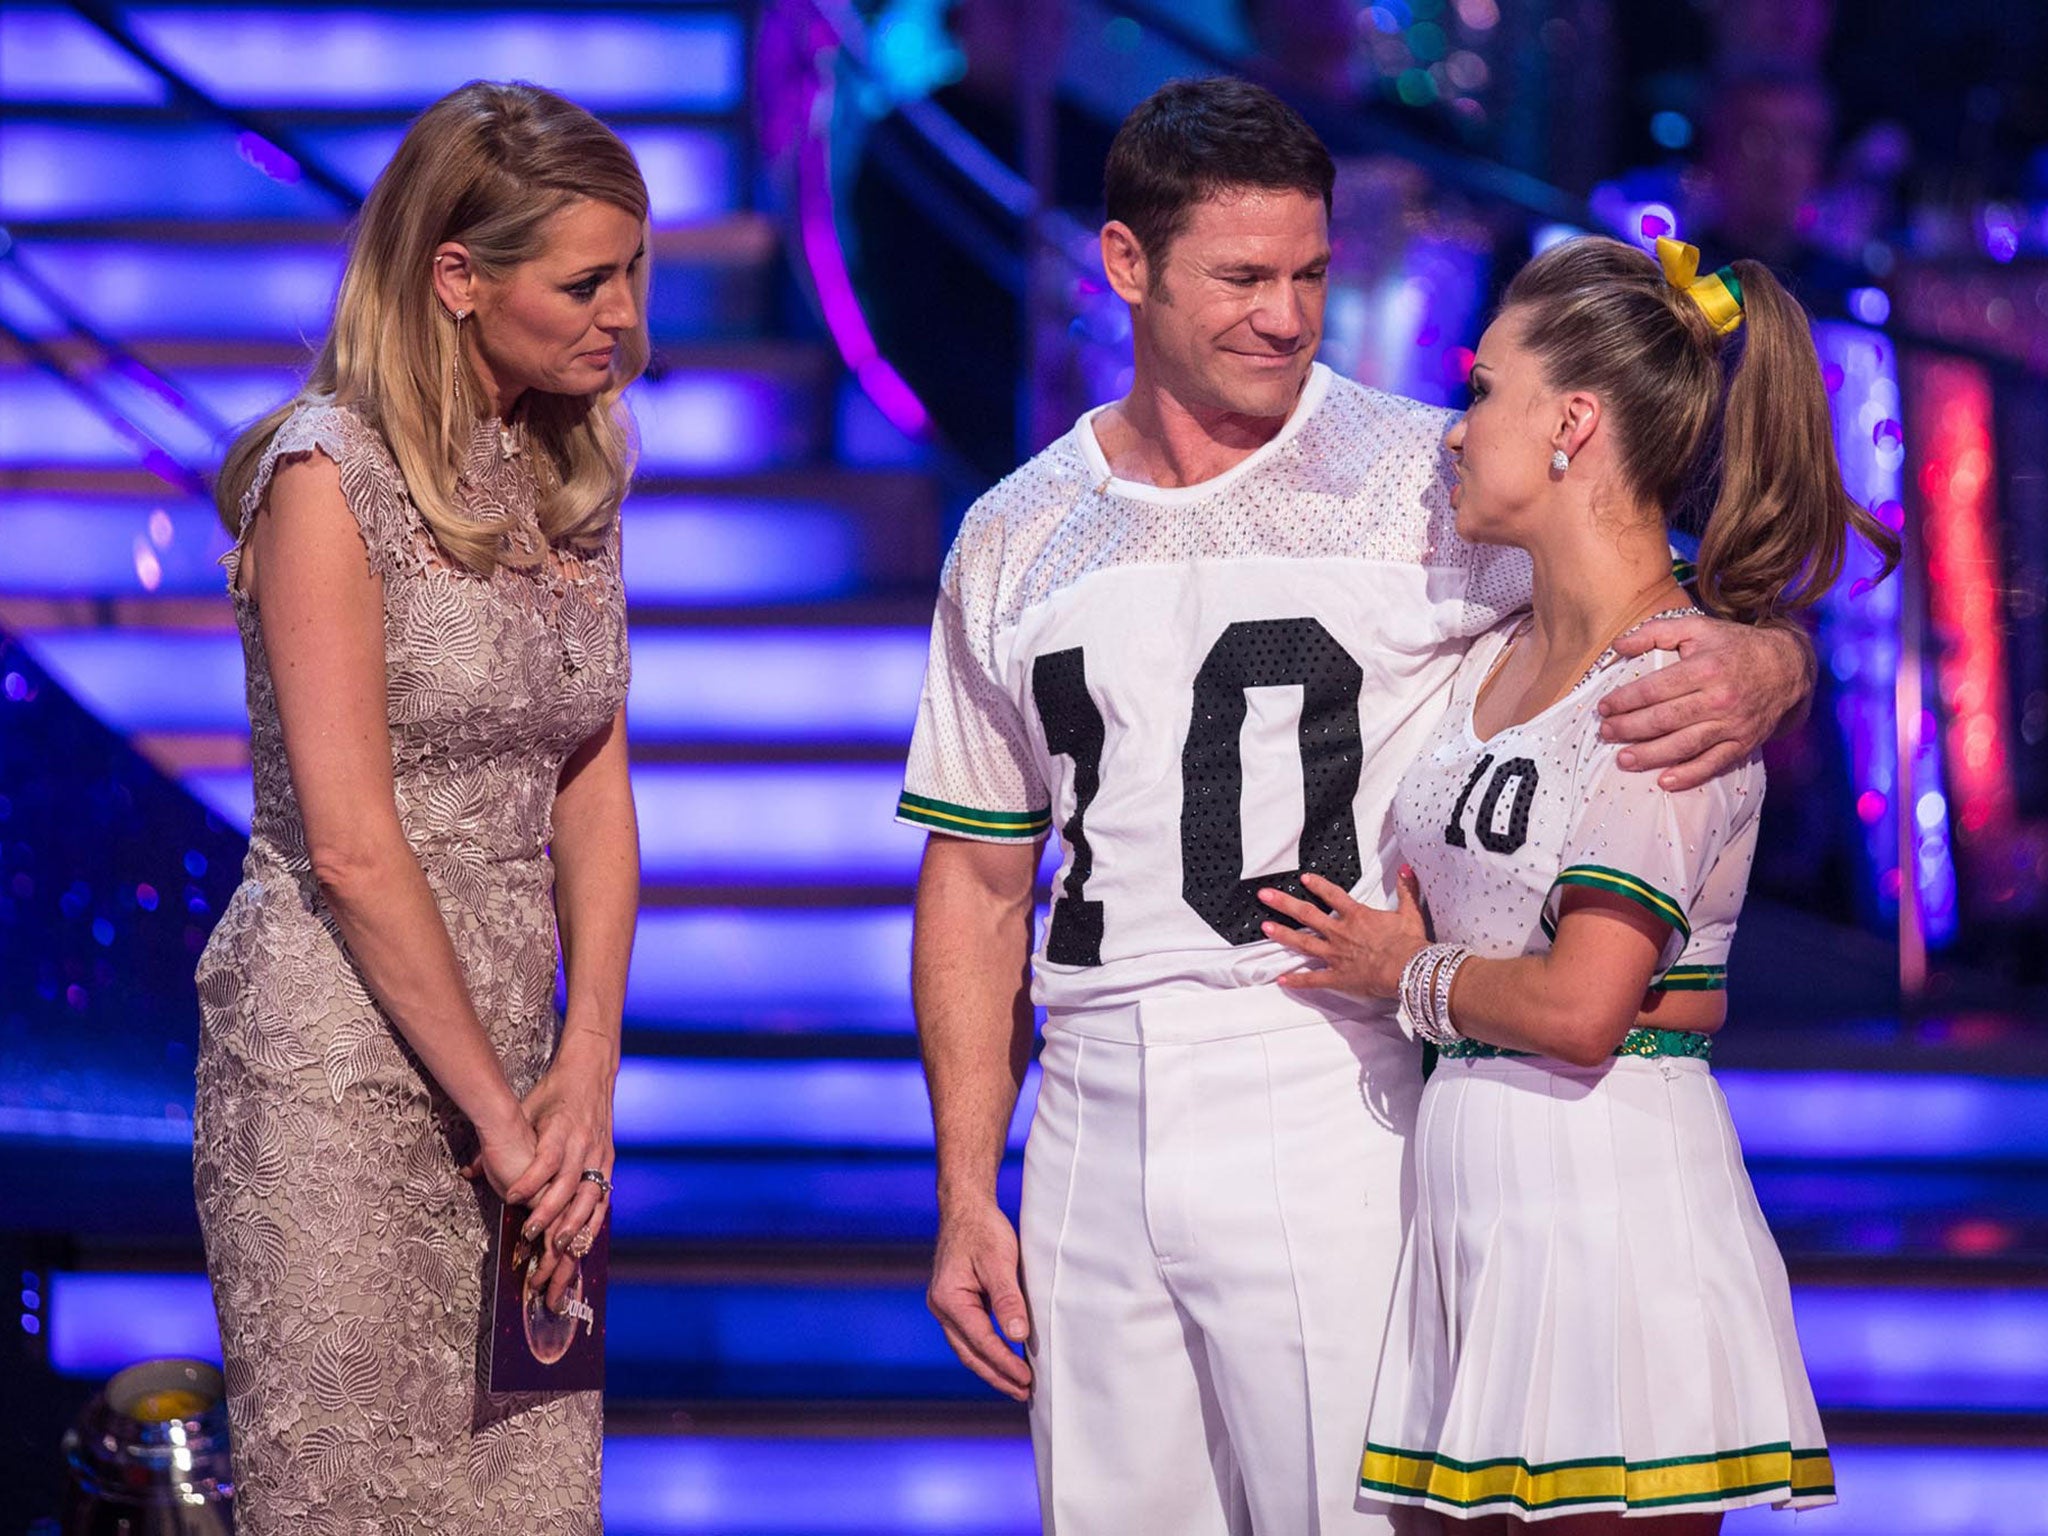 Steve Backshall has become the eighth celebrity to leave Strictly Come Dancing